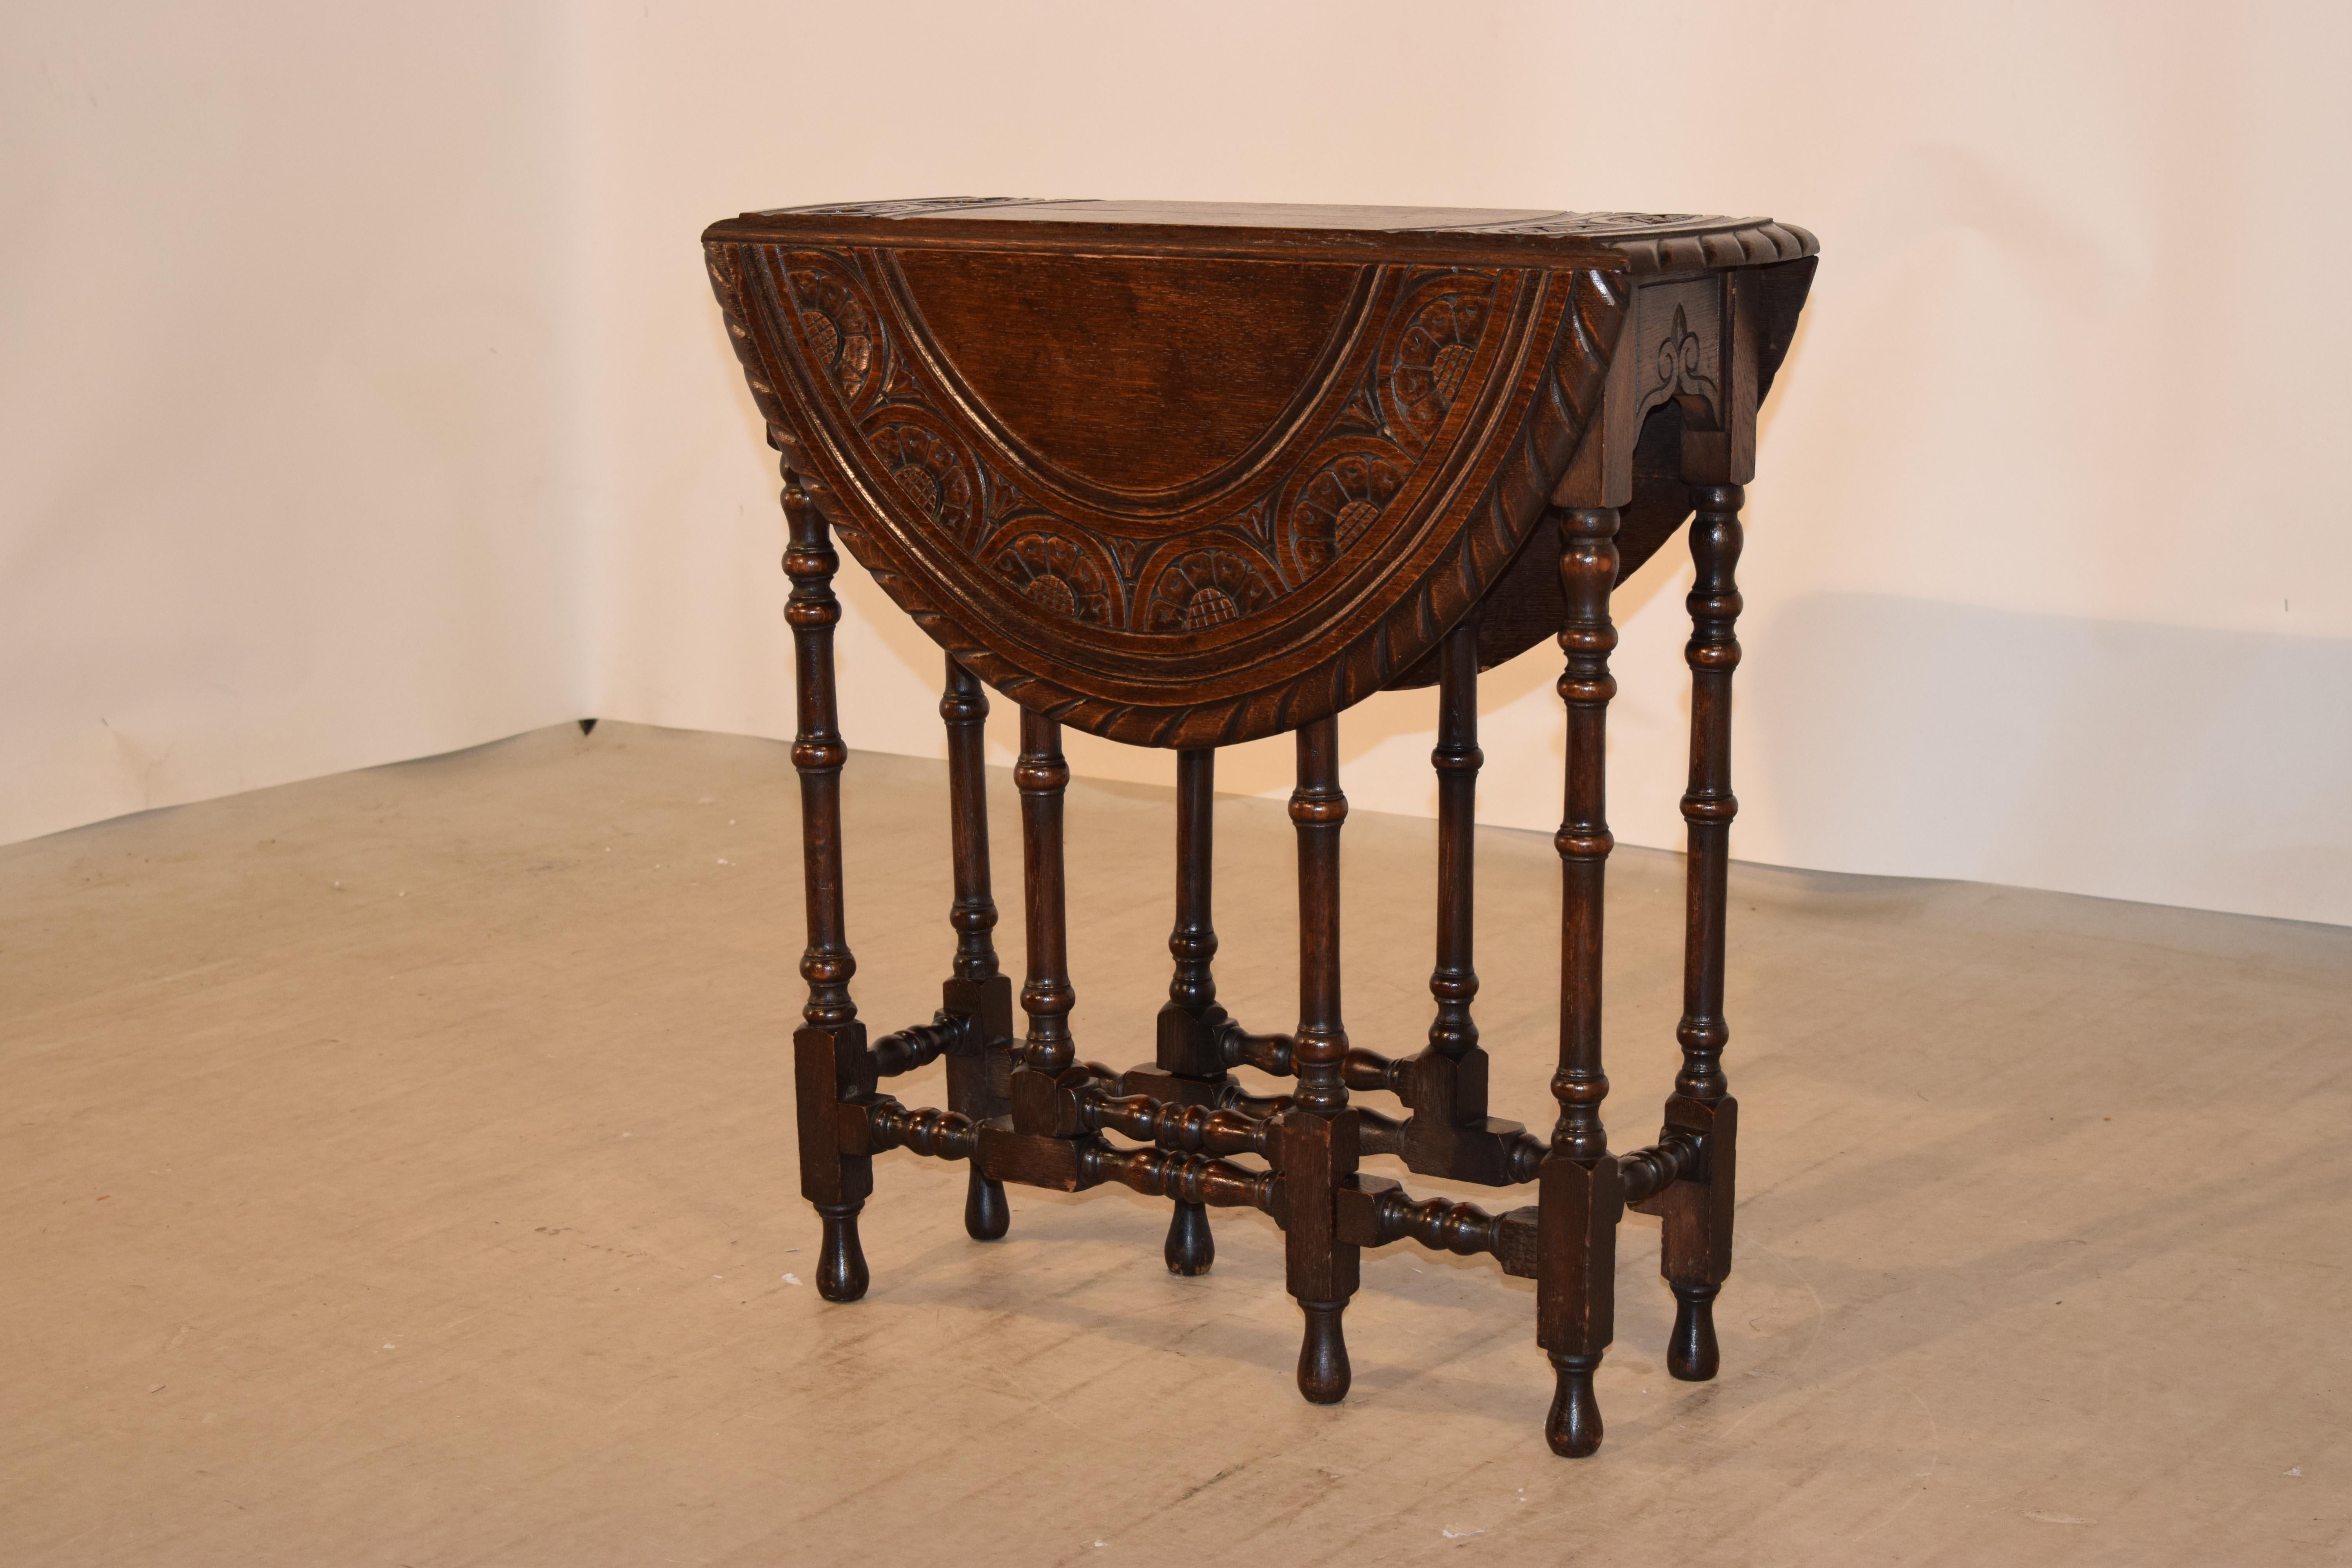 19th century English oak gate leg table with a wonderfully hand carved decorated and beveled edge surrounding a hand carved border over a nicely scalloped and carved apron and hand-turned legs and gates, joined by matching hand-turned stretchers and